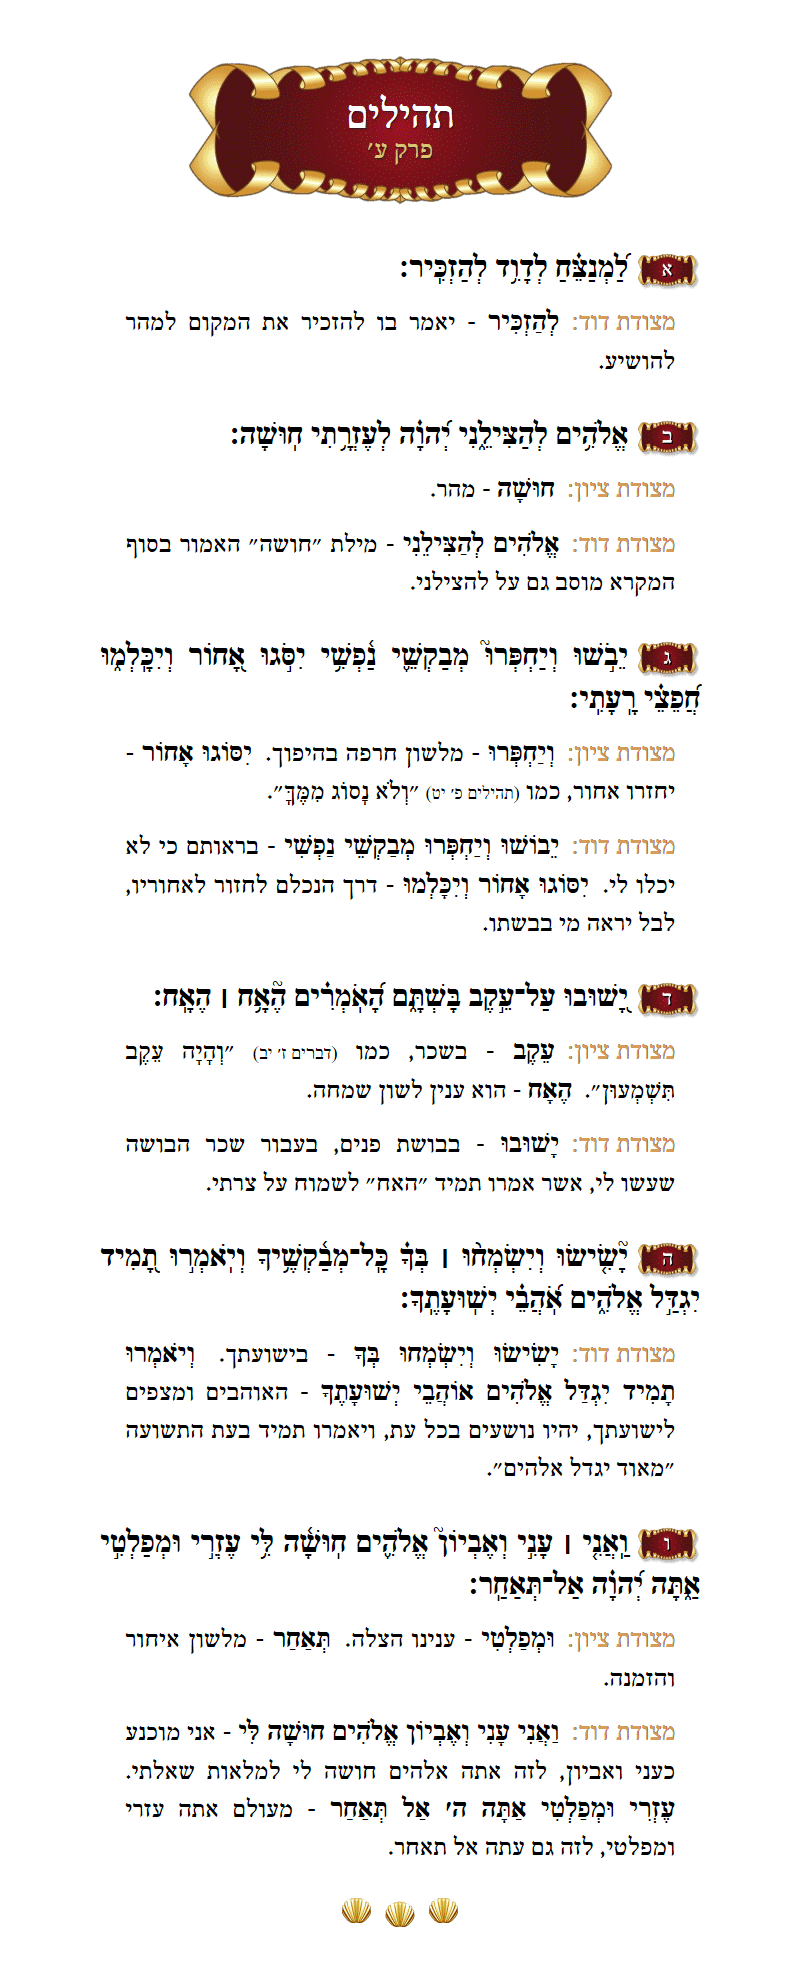 Sefer Tehillim Chapter 70 with commentary